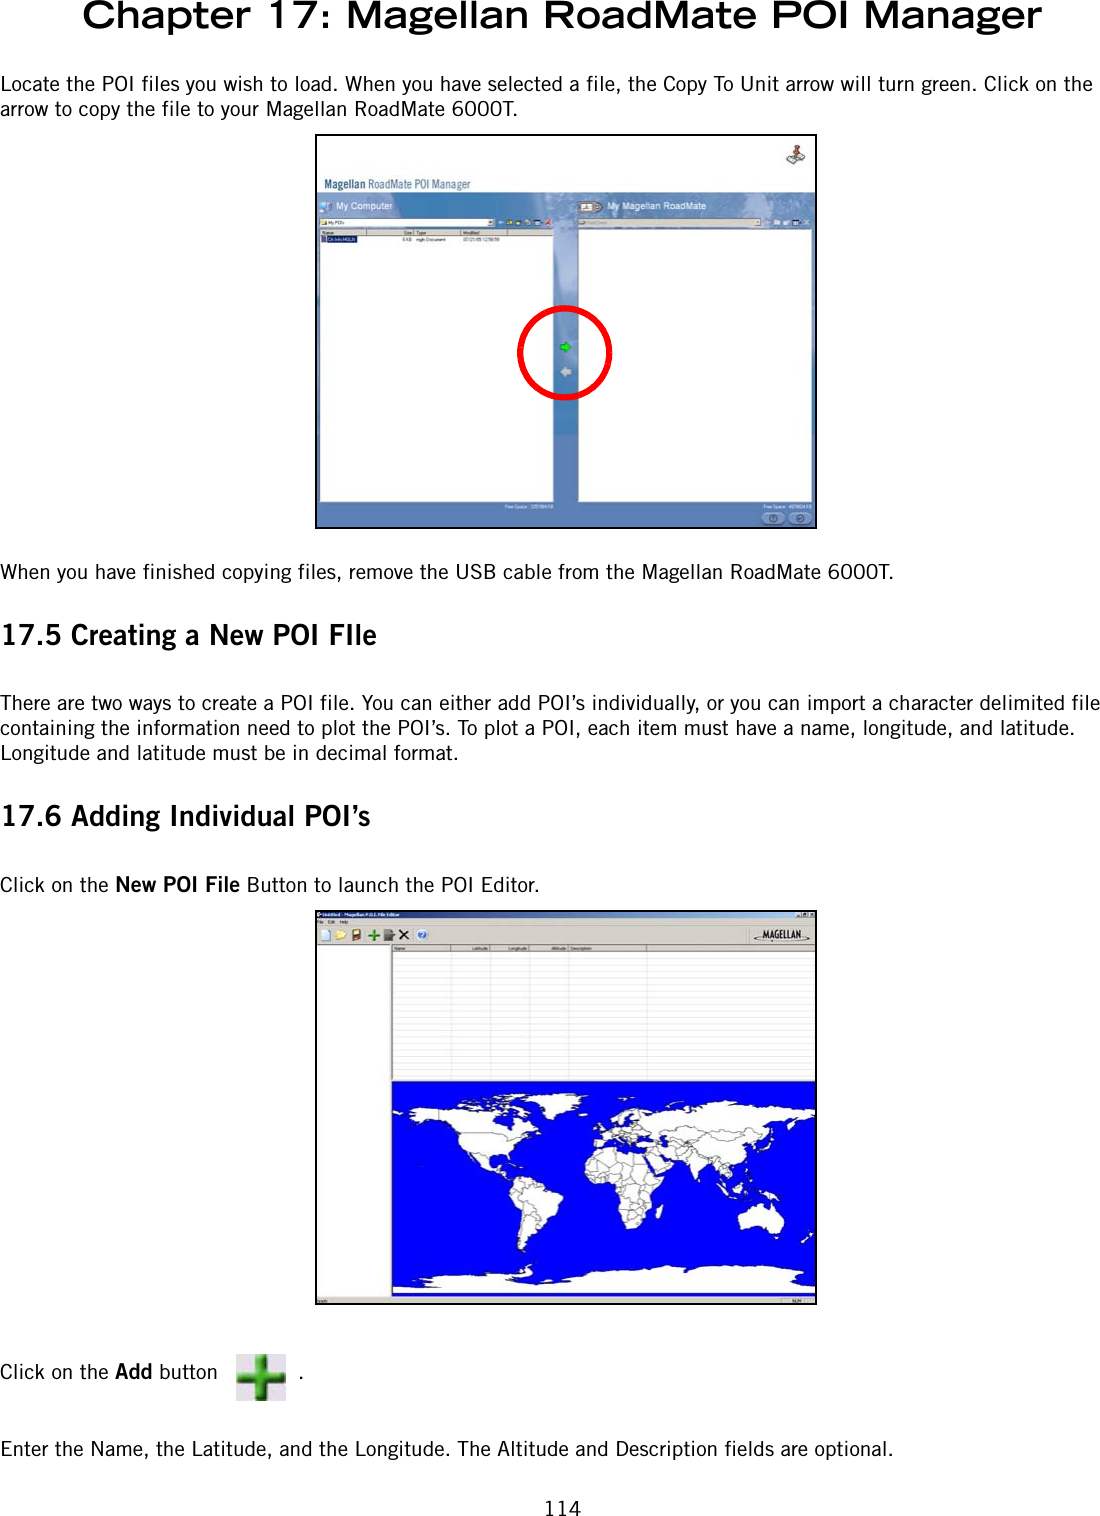 Chapter 17: Magellan RoadMate POI Manager114Locate the POI files you wish to load. When you have selected a file, the Copy To Unit arrow will turn green. Click on the arrow to copy the file to your Magellan RoadMate 6000T.When you have finished copying files, remove the USB cable from the Magellan RoadMate 6000T.17.5 Creating a New POI FIleThere are two ways to create a POI file. You can either add POI’s individually, or you can import a character delimited file containing the information need to plot the POI’s. To plot a POI, each item must have a name, longitude, and latitude. Longitude and latitude must be in decimal format.17.6 Adding Individual POI’sClick on the New POI File Button to launch the POI Editor.Click on the Add button  .Enter the Name, the Latitude, and the Longitude. The Altitude and Description fields are optional.